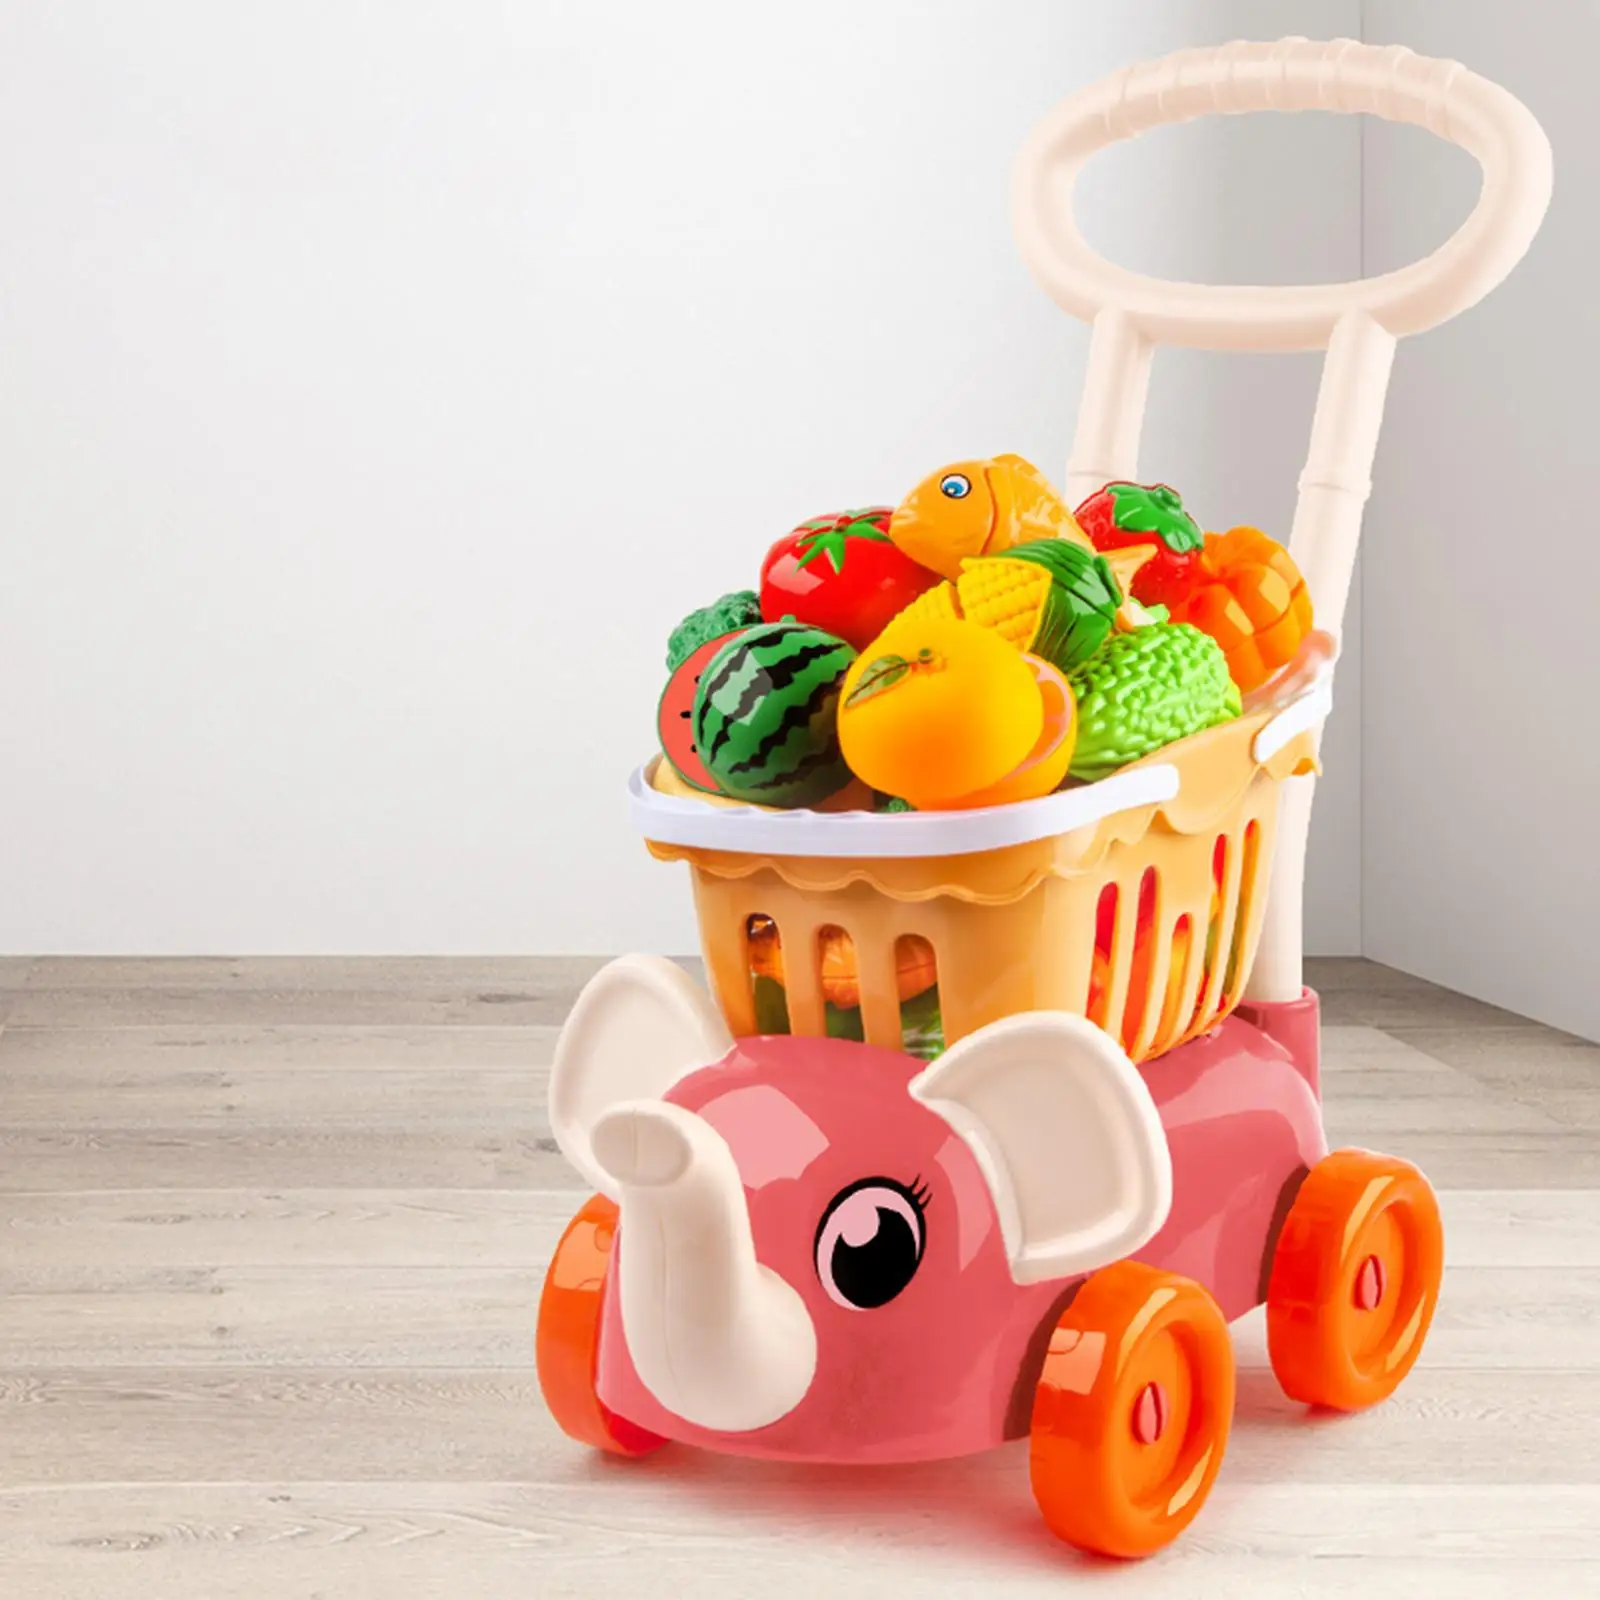 Mini Shopping Cart Pretend Play Grocery Cart w/ Vegetable Fruit Cutting Food Playset Children Creative Groceries Education Toy